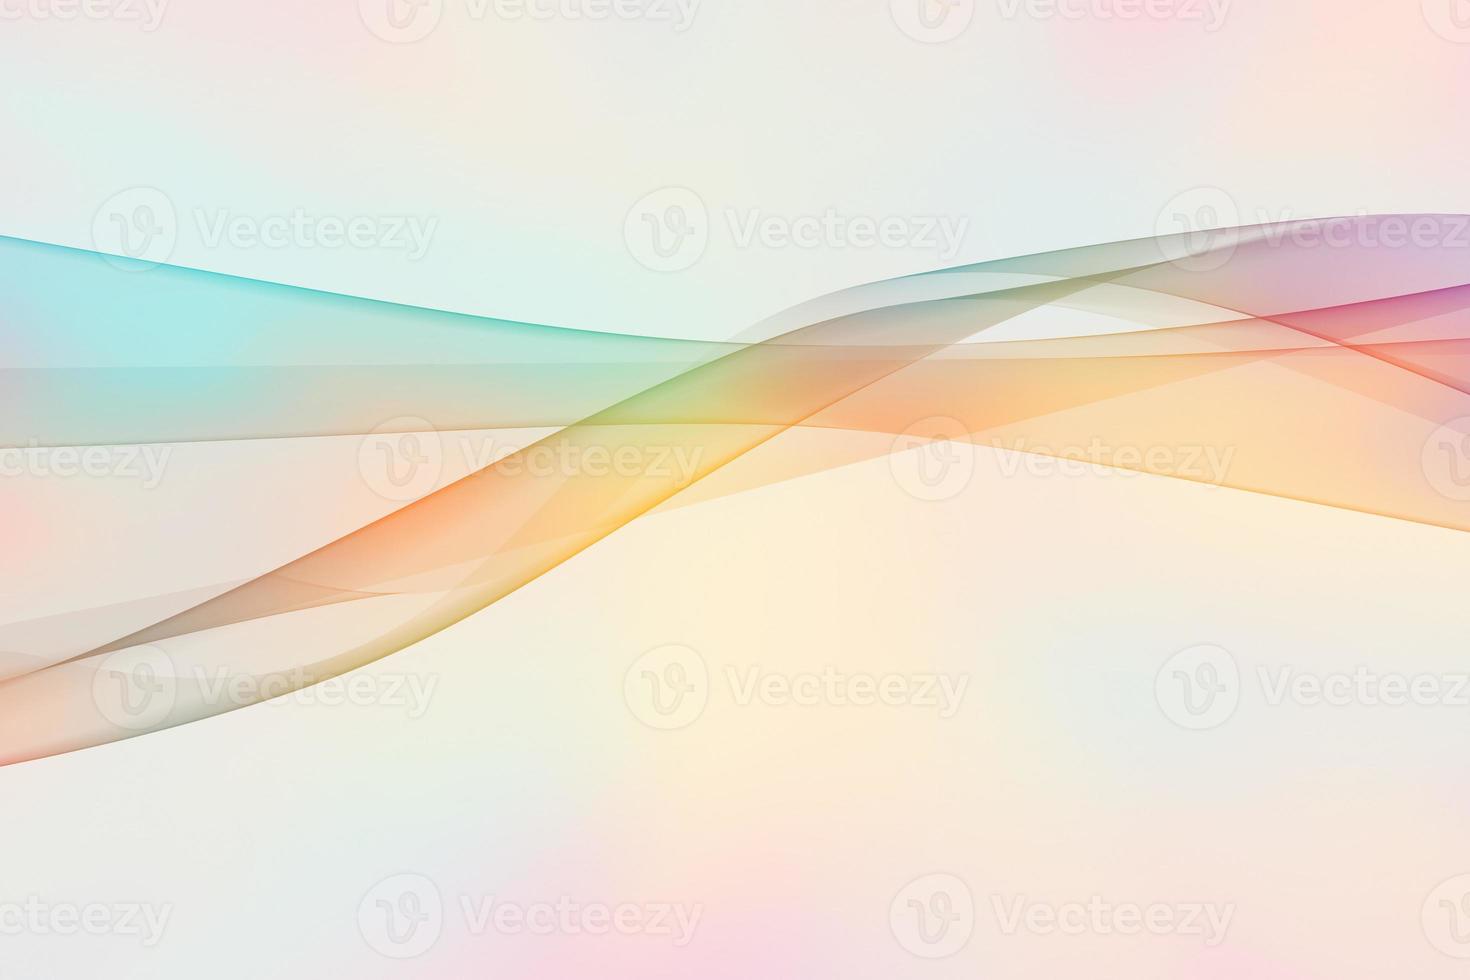 Trendy smooth wavy fluid gradient three-dimensional background design illustration. Abstract smooth colorful wave 3d rendering photo